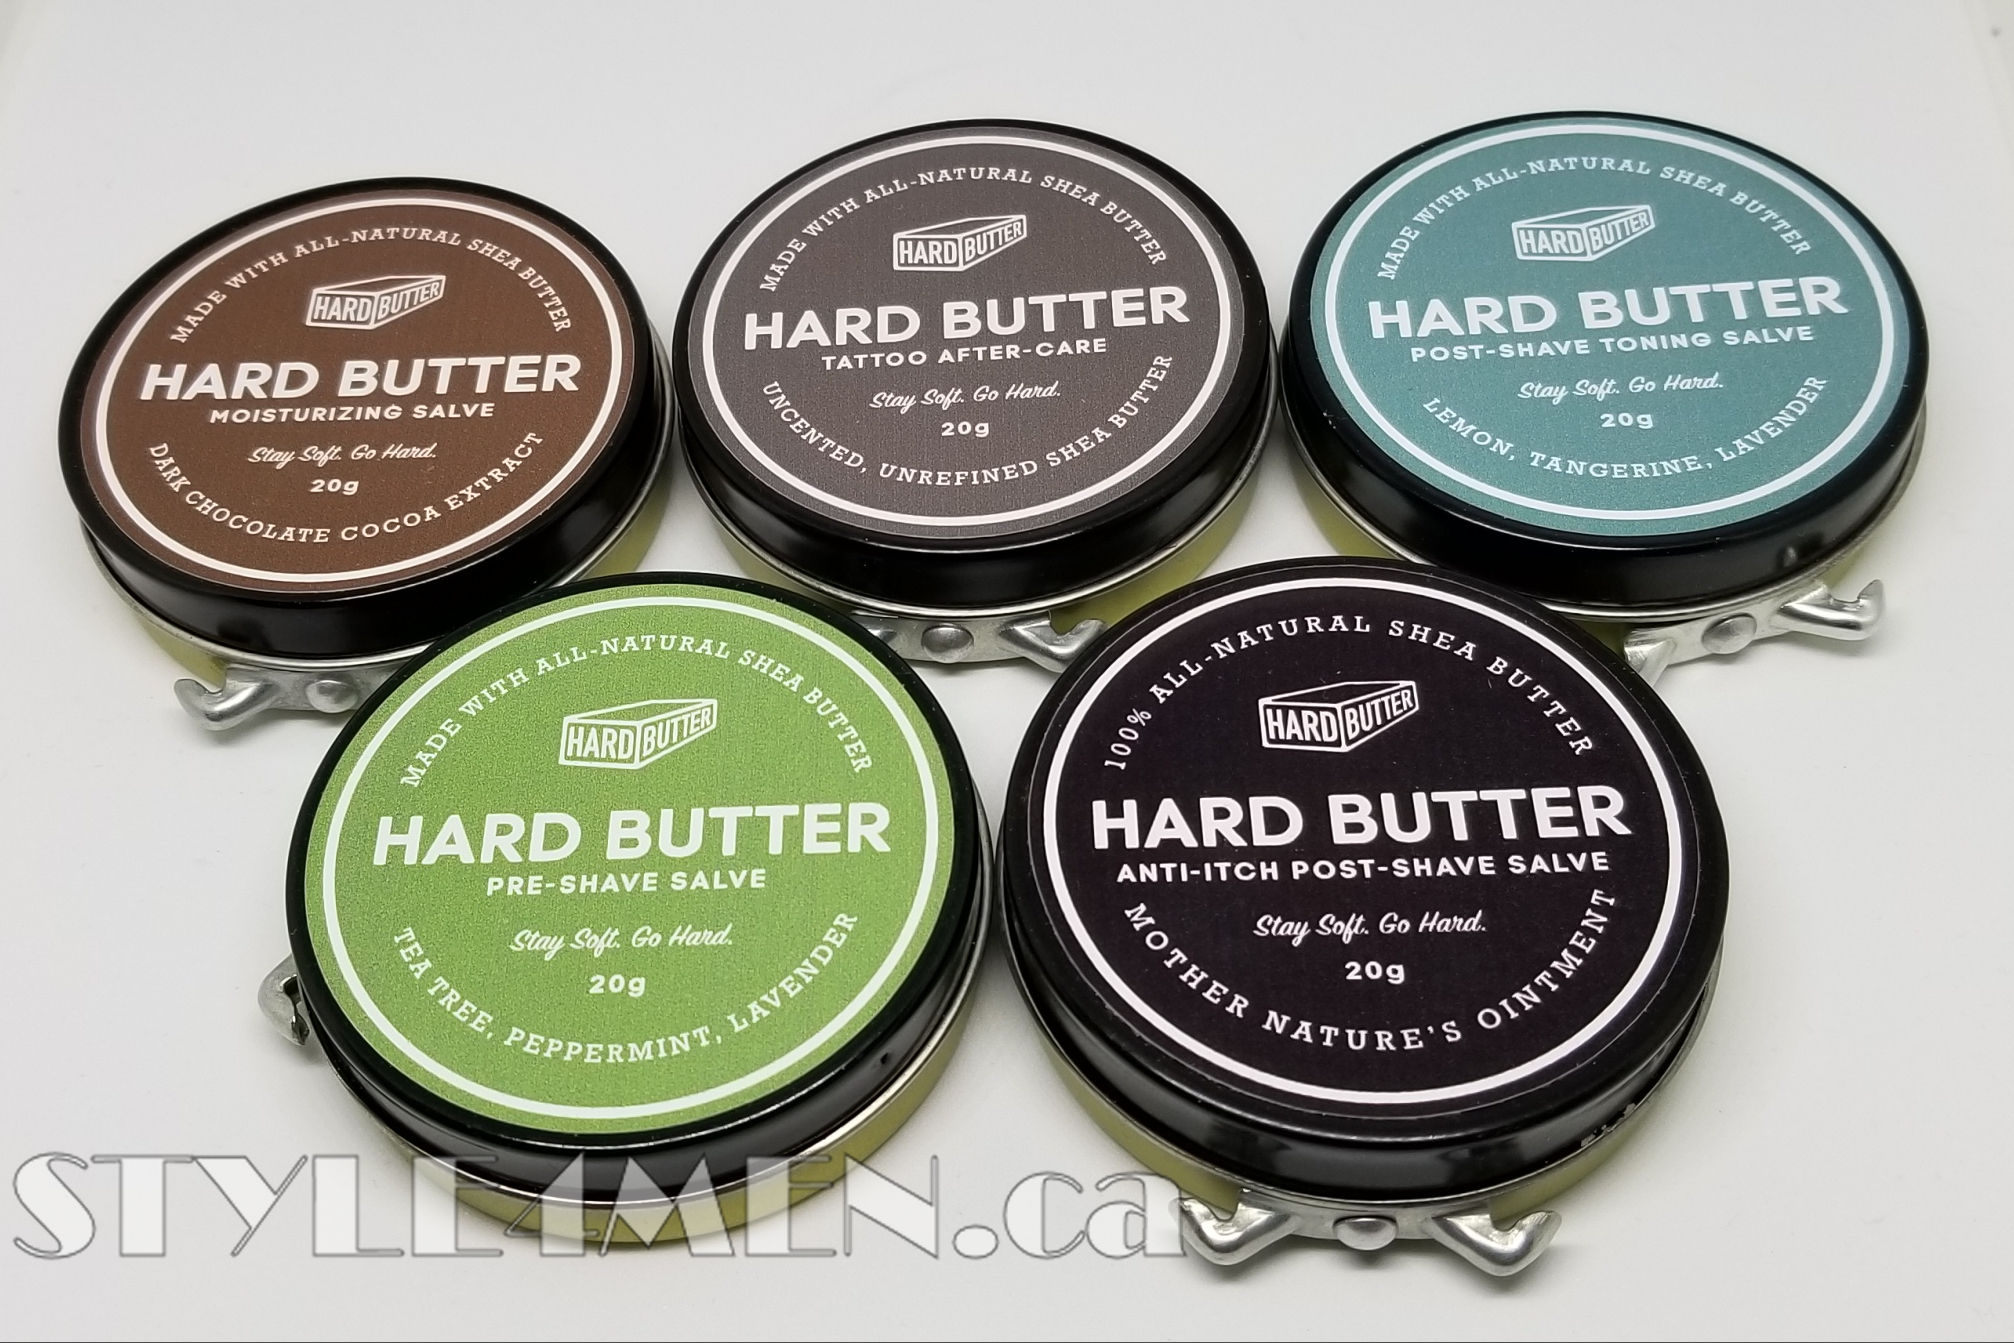 Hard Butter Pre-Shave and Post-Shave Salves